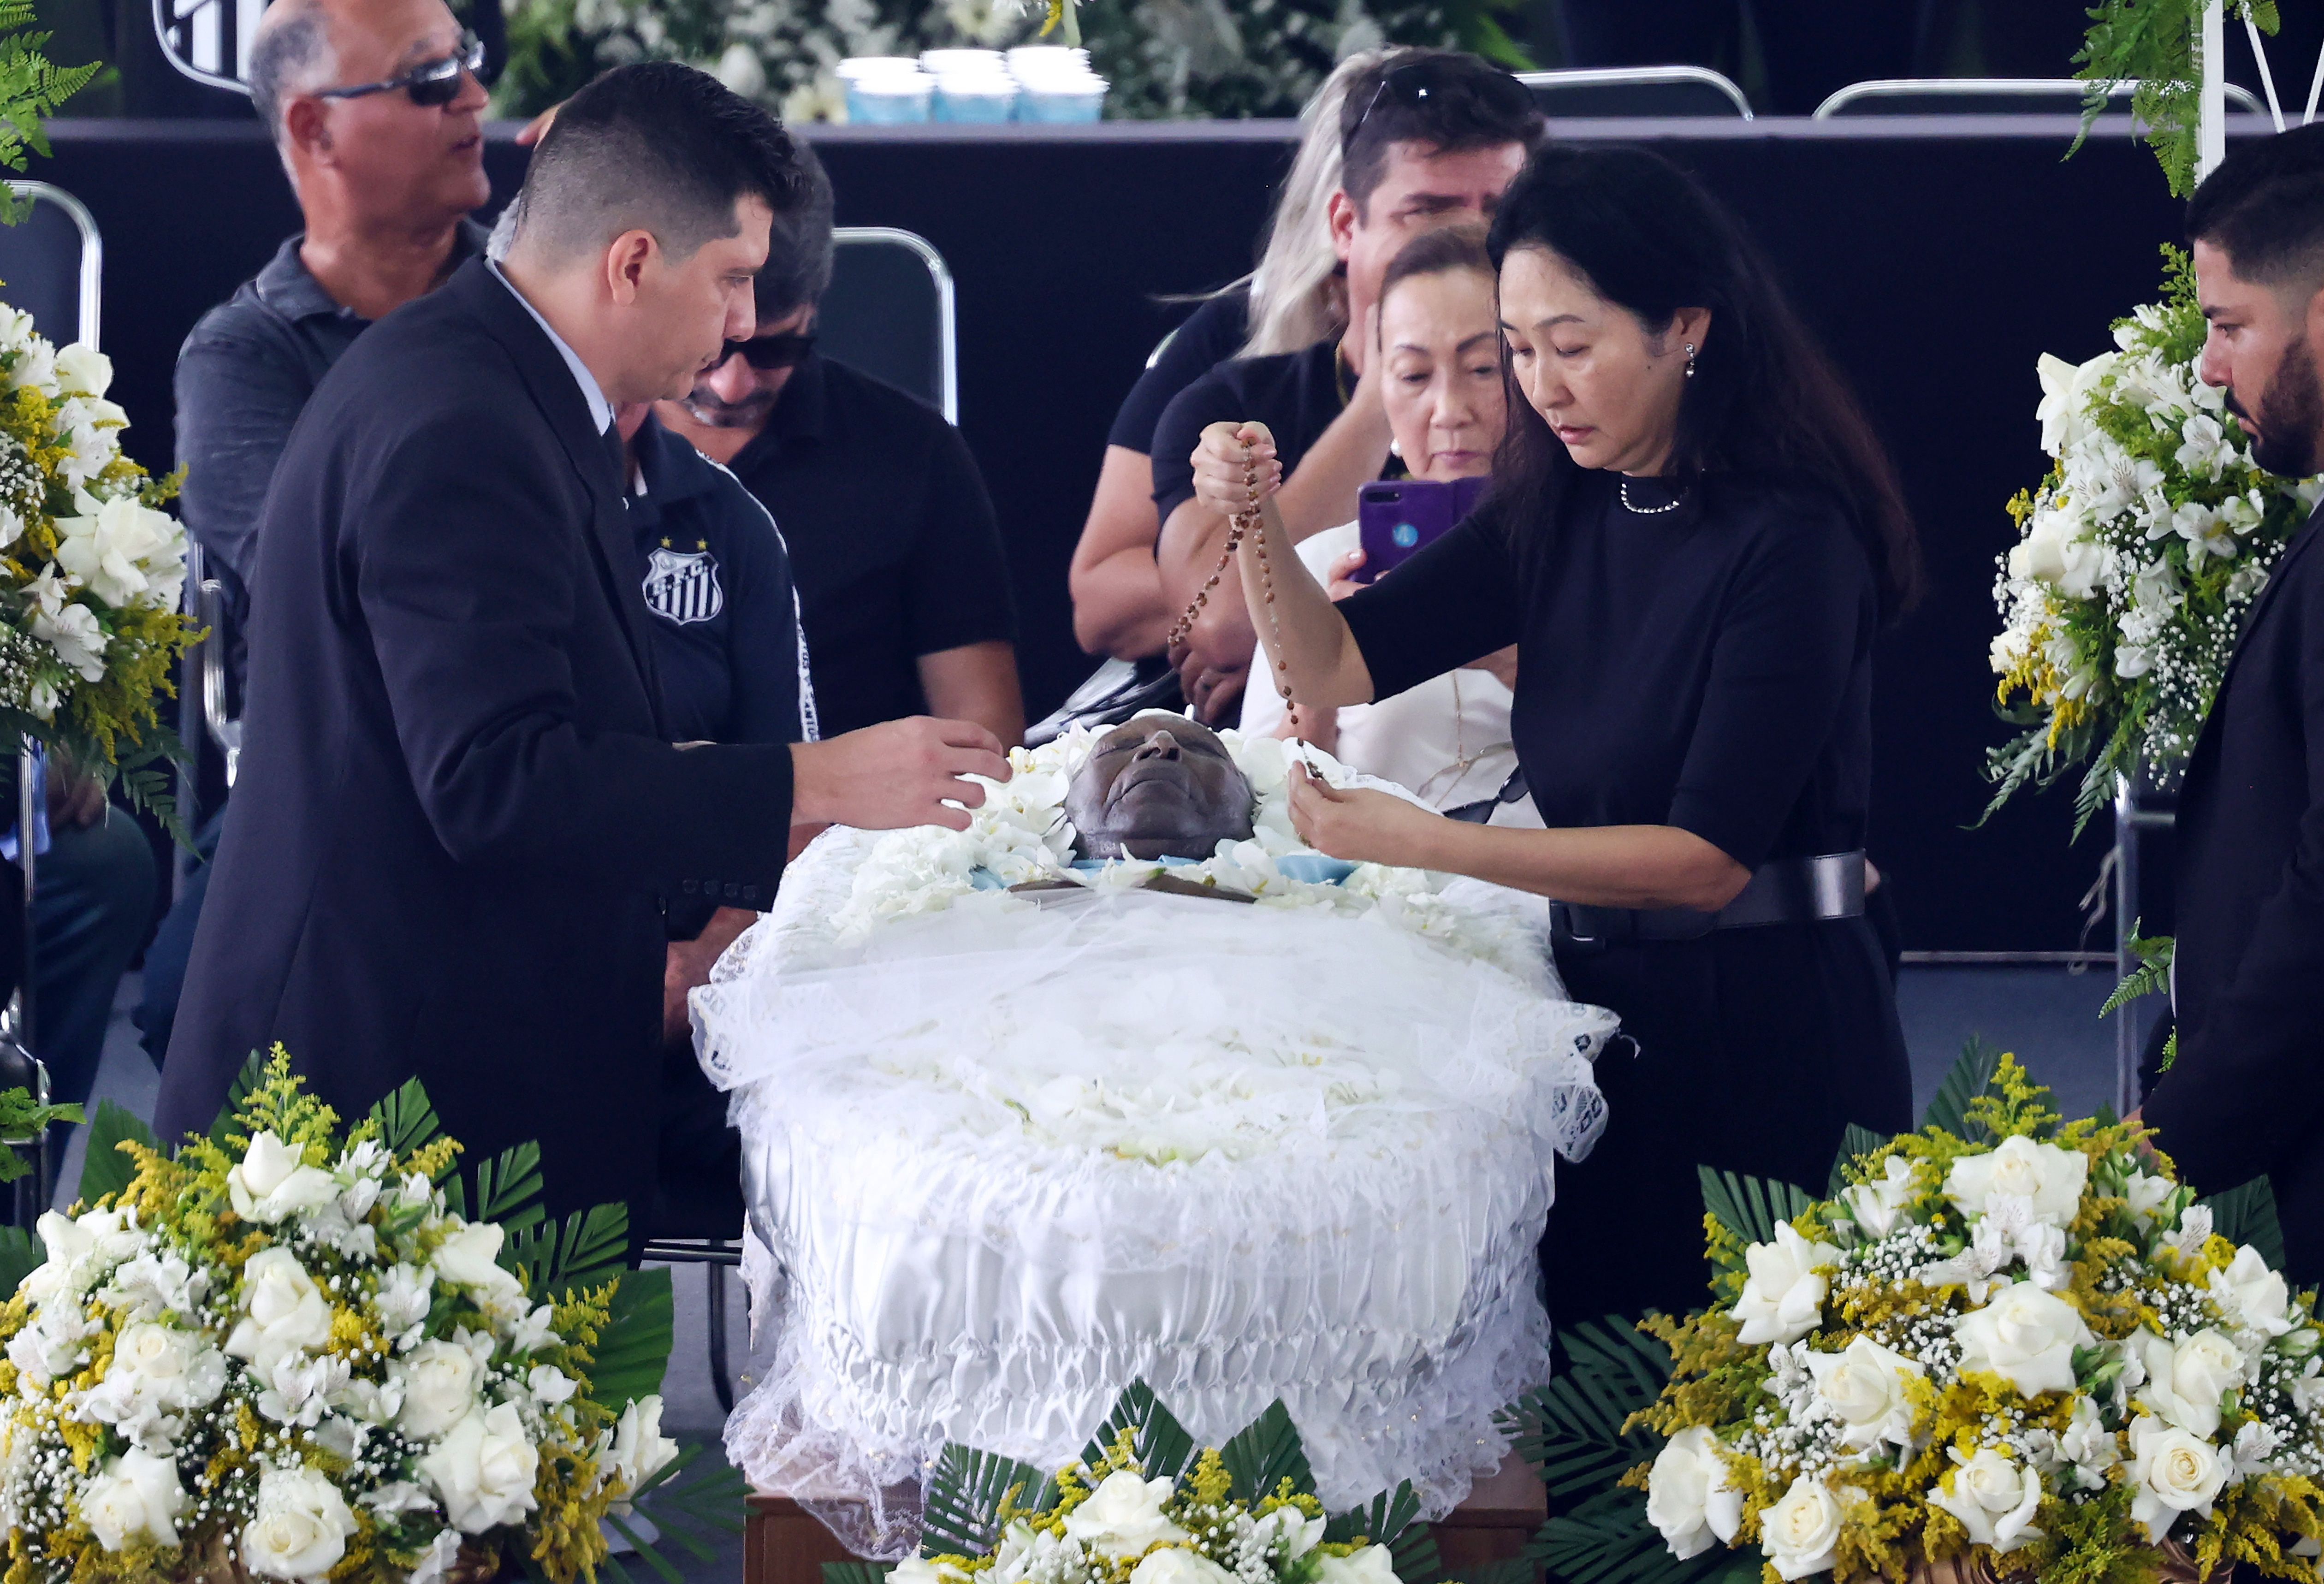 Pele's wife Marcia Aoki (2nd R) places a rosary on Pele's coffin in Urbano Caldeira Stadium at his funeral on January 02, 2023 in Santos, Brazil.